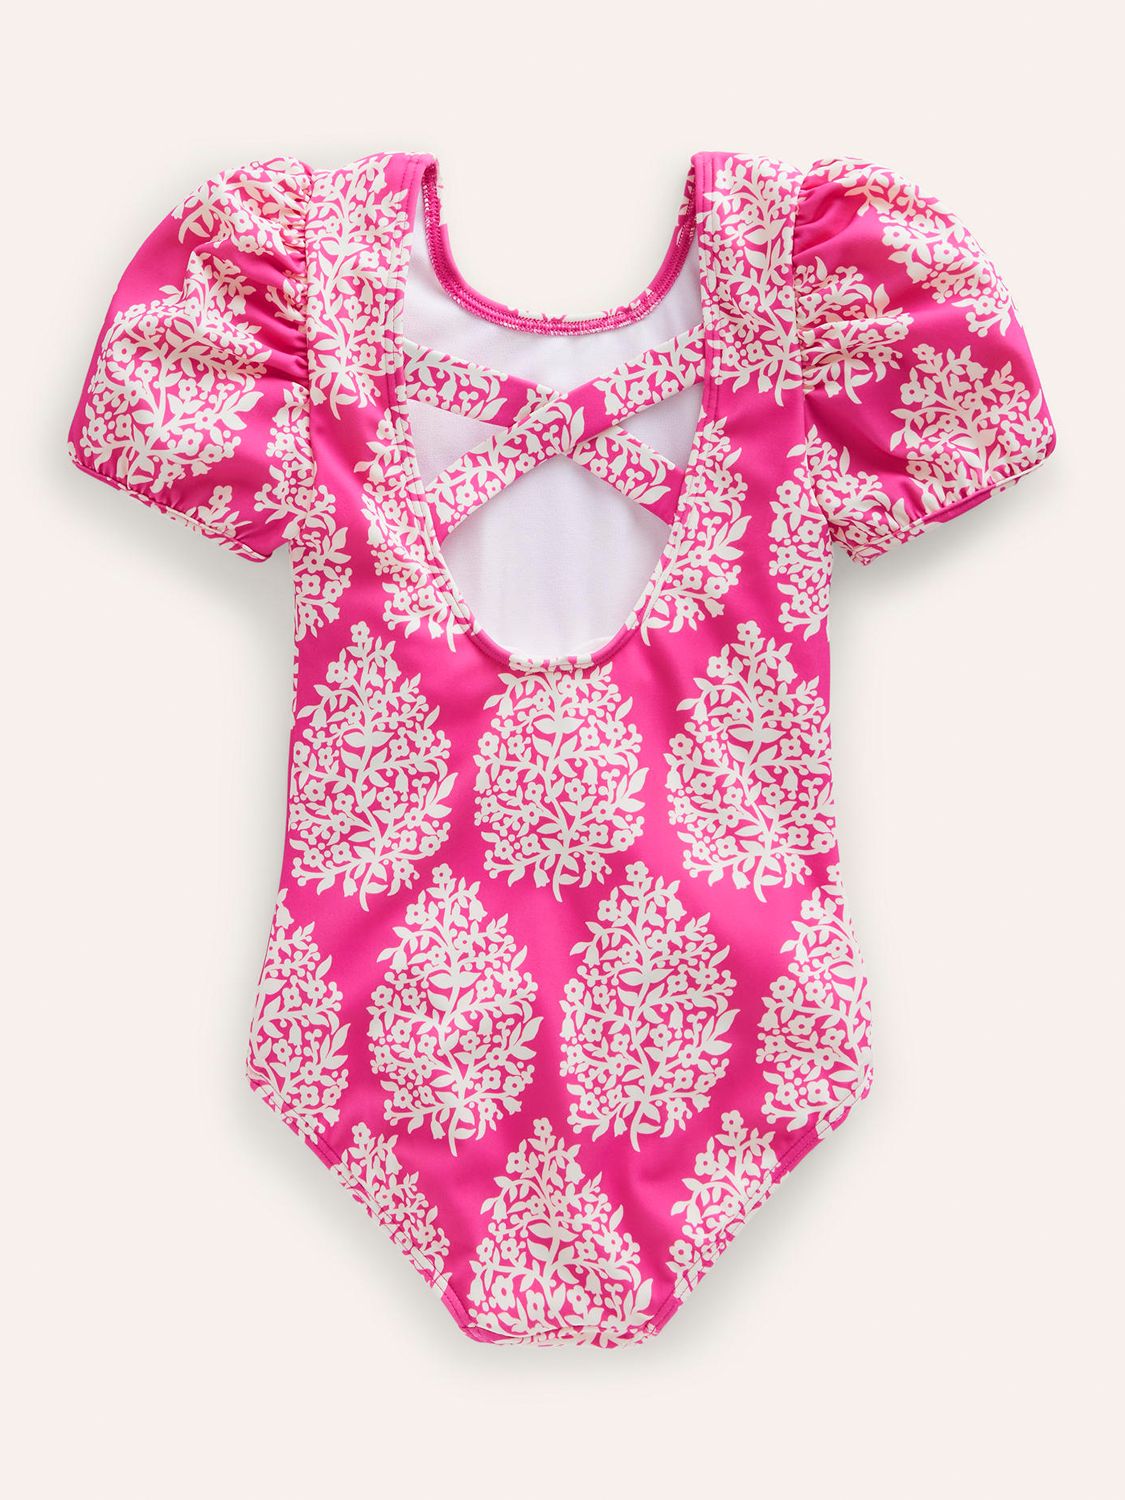 Mini Boden Kids' Floral Print Puff Sleeve Swimsuit, Pink, 2-3 years